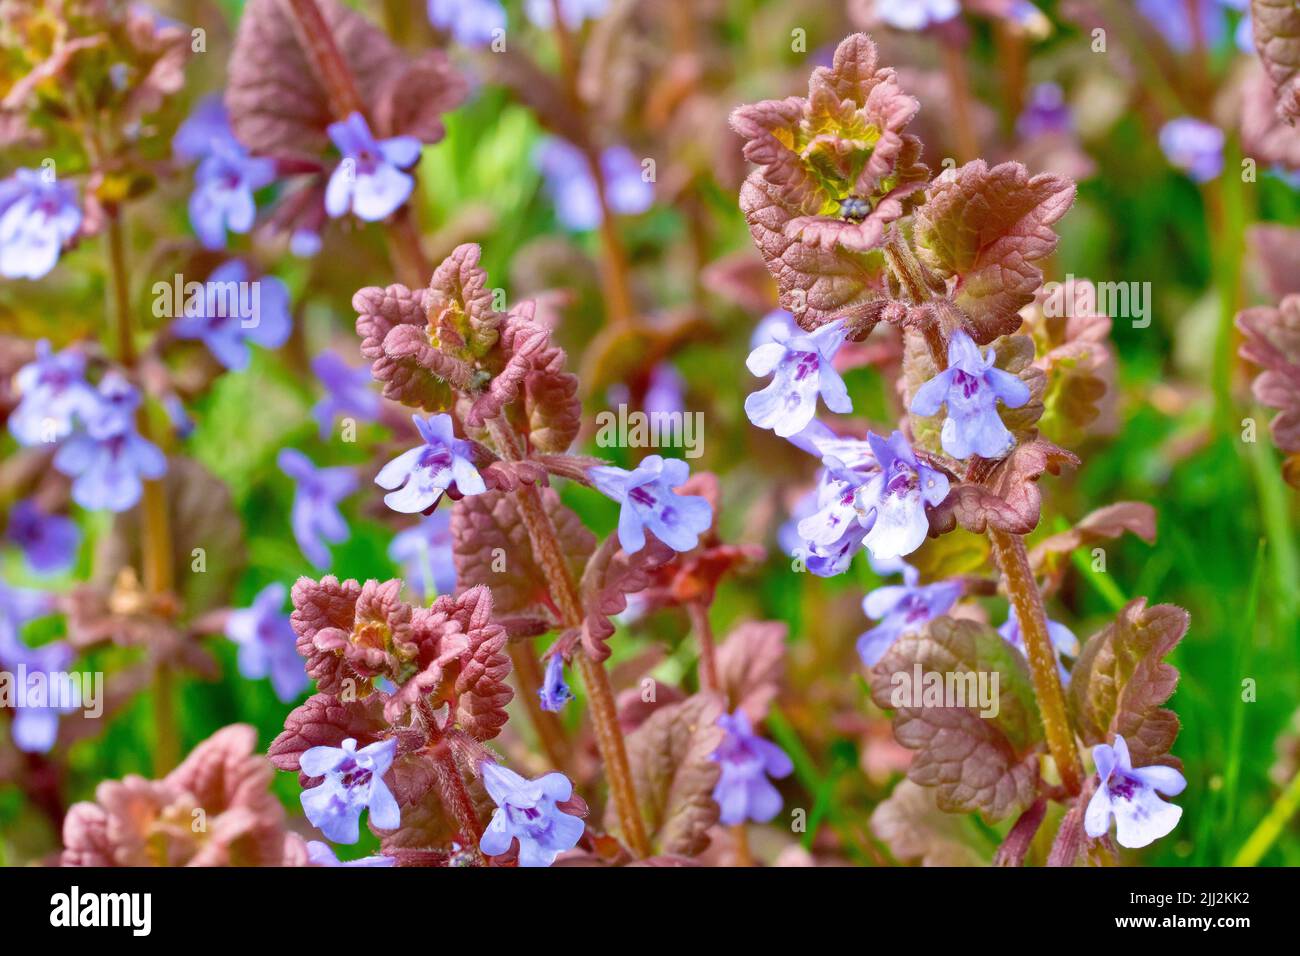 Ground Ivy (glechoma hederacea), close up focusing on a single flowering plant out of many. Stock Photo